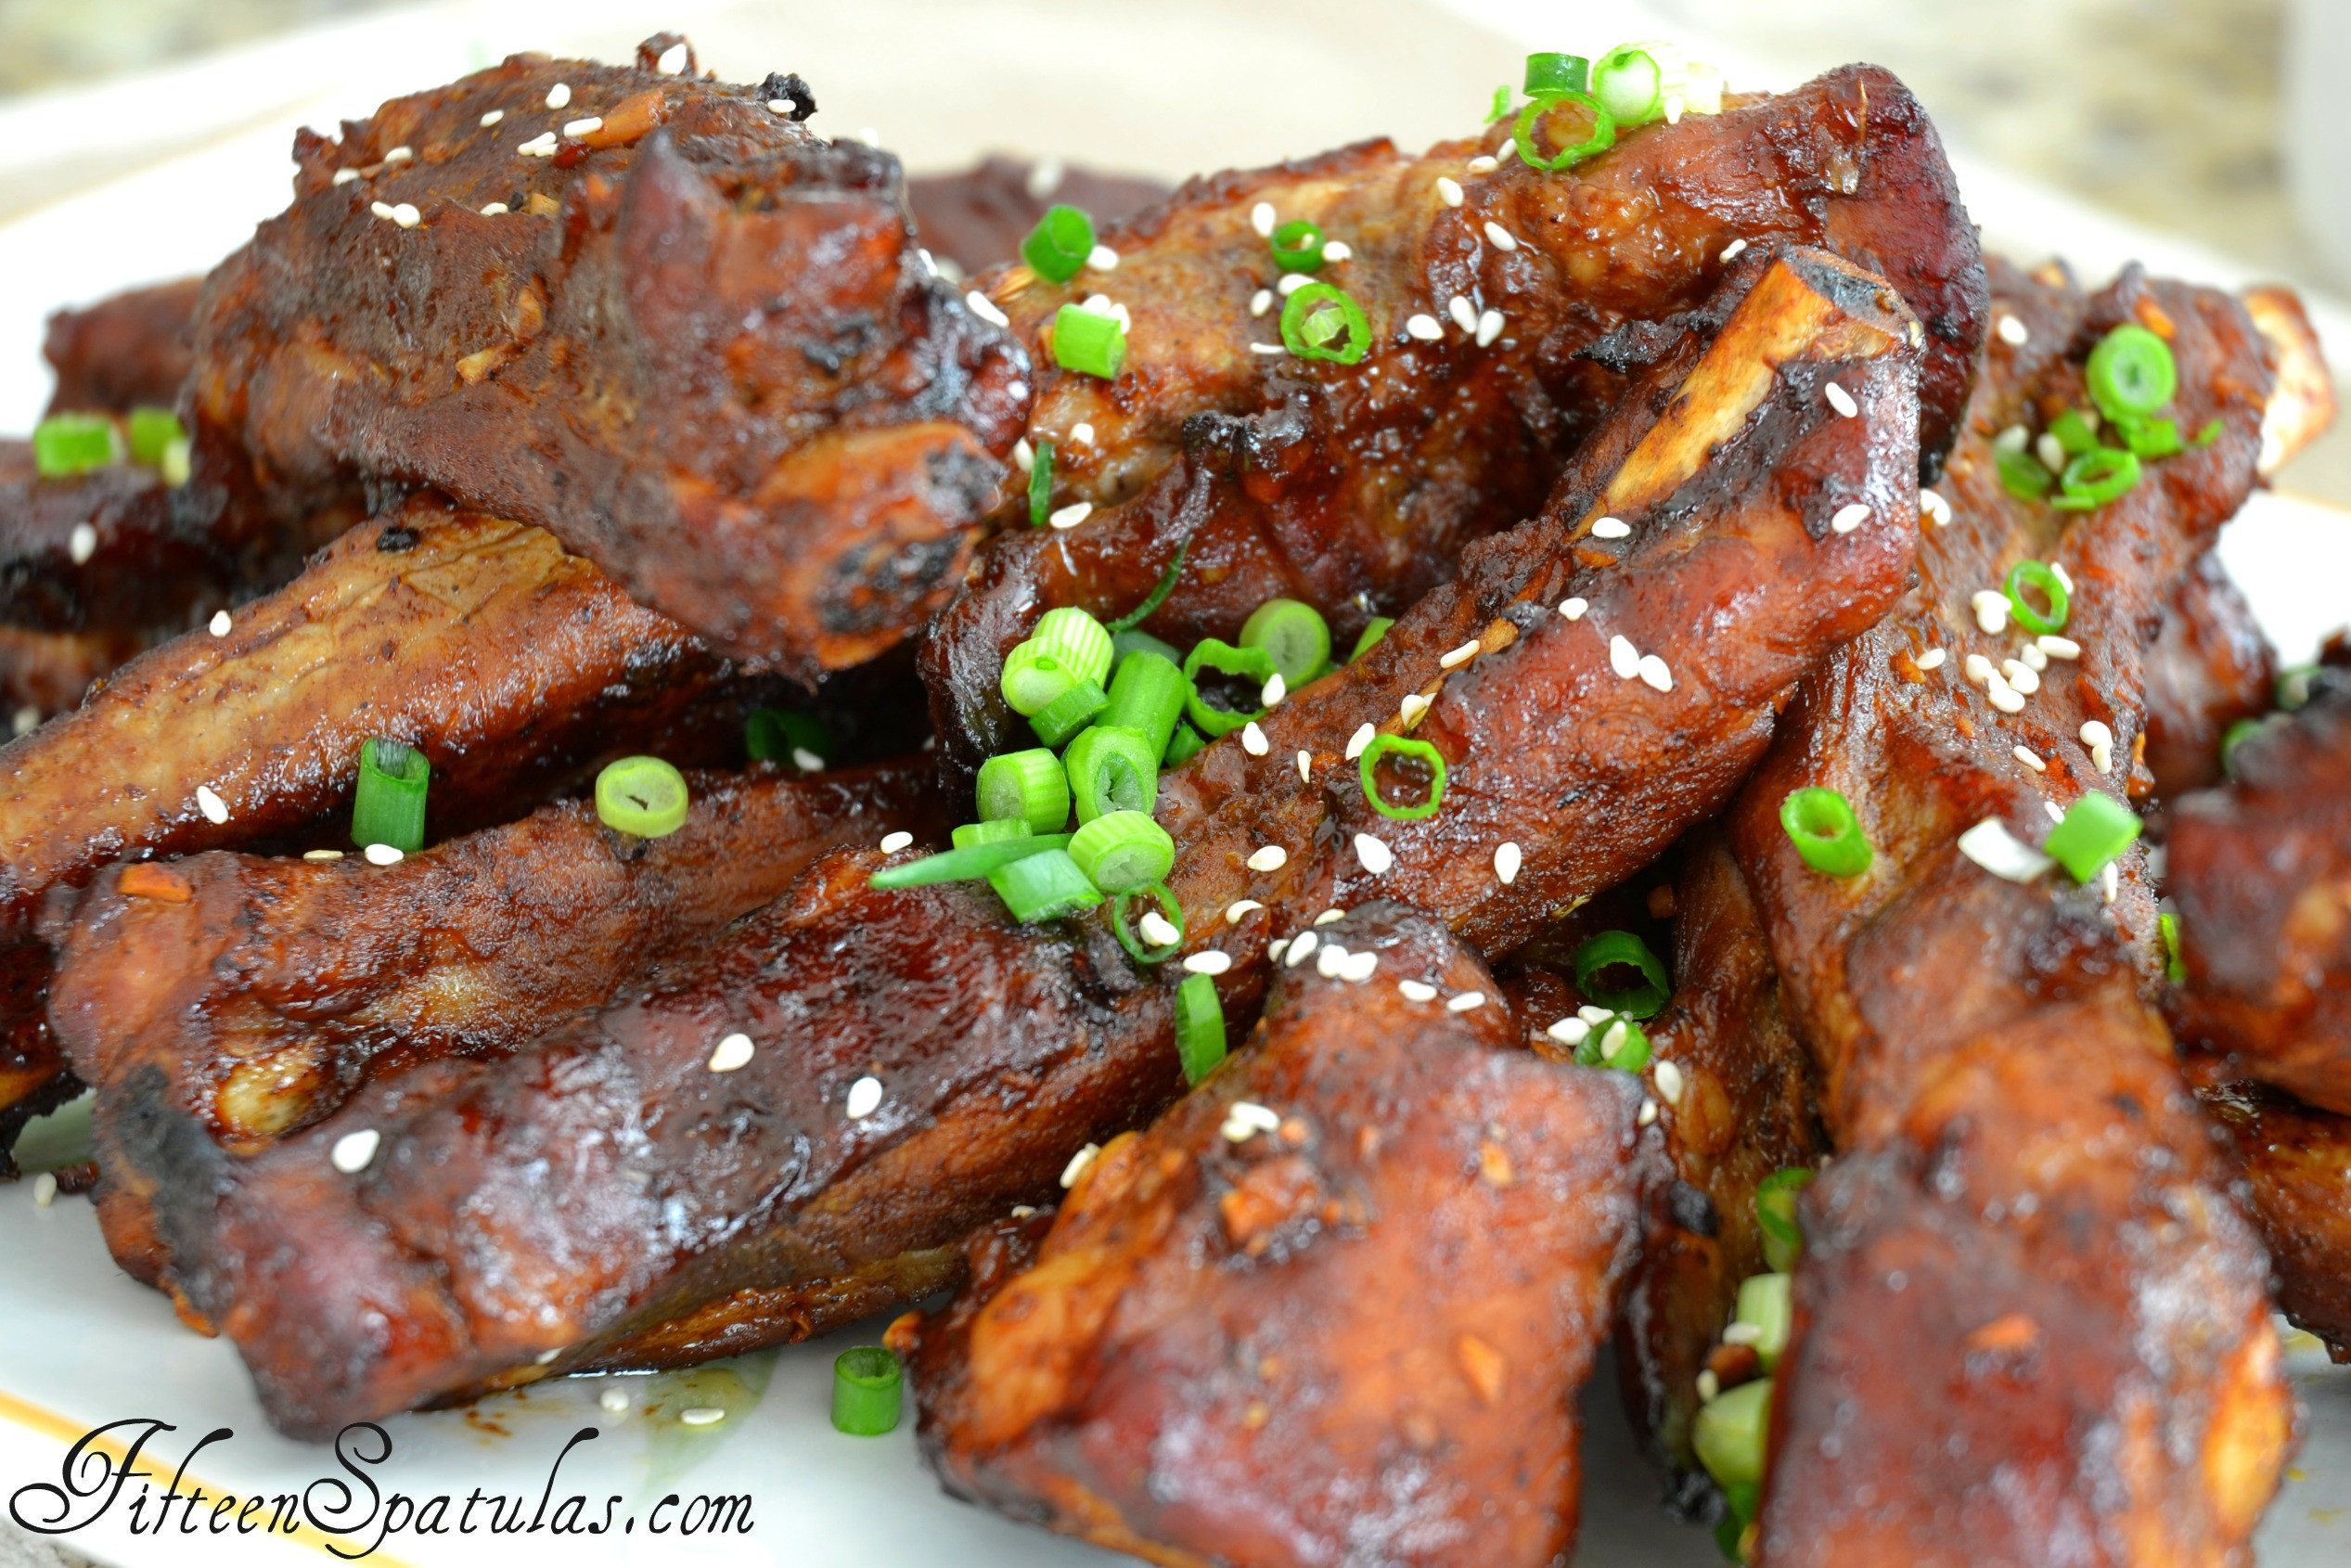 Chinese Spare Rib Recipes
 Sticky Chinese Spareribs Fifteen Spatulas